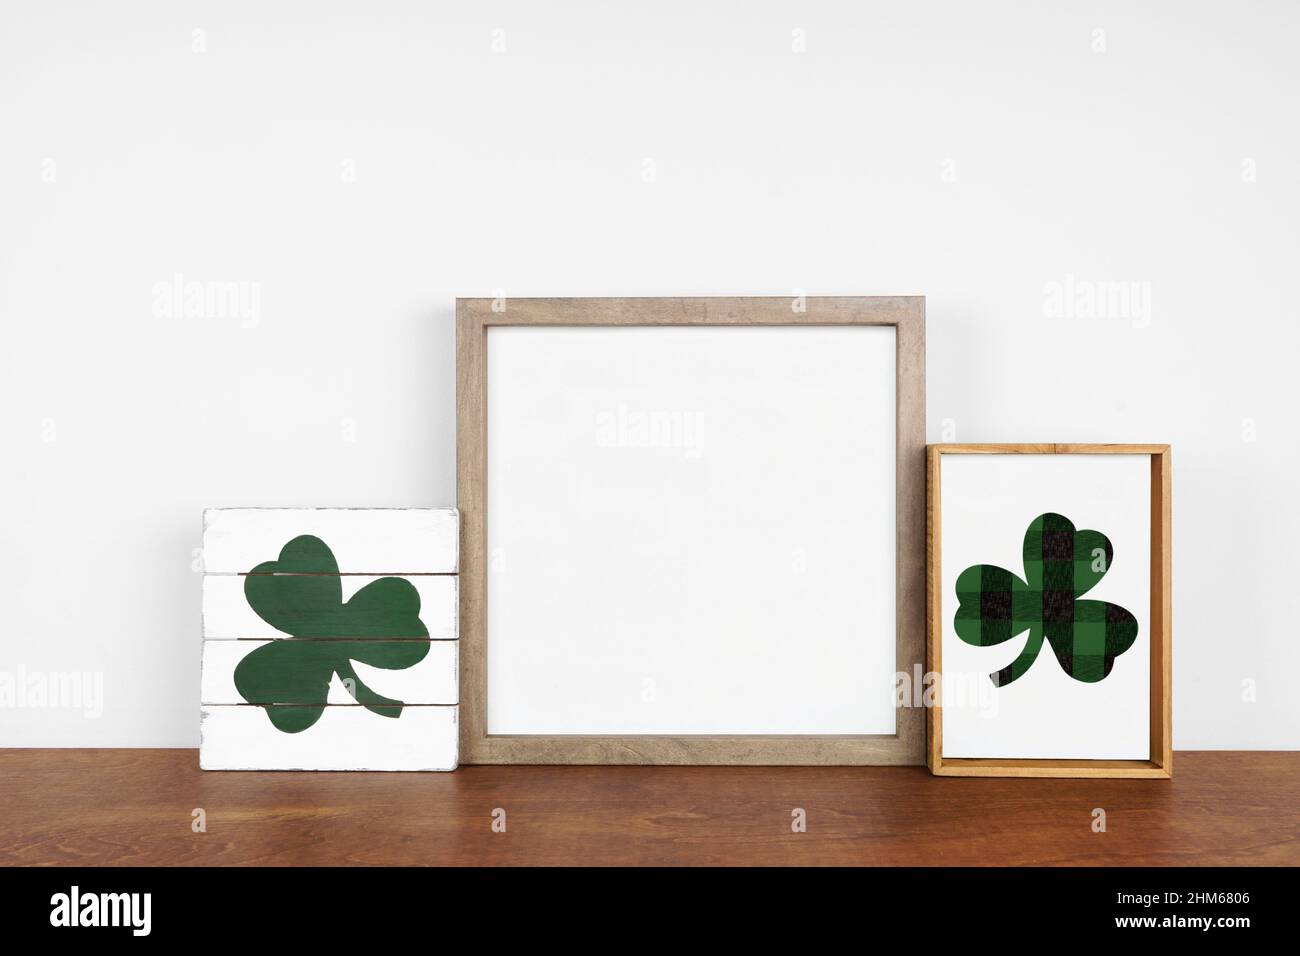 Mock up wood frame with St Patricks Day decor on a wood shelf. Rustic wood signs. Square frame against a white wall. Copy space. Stock Photo